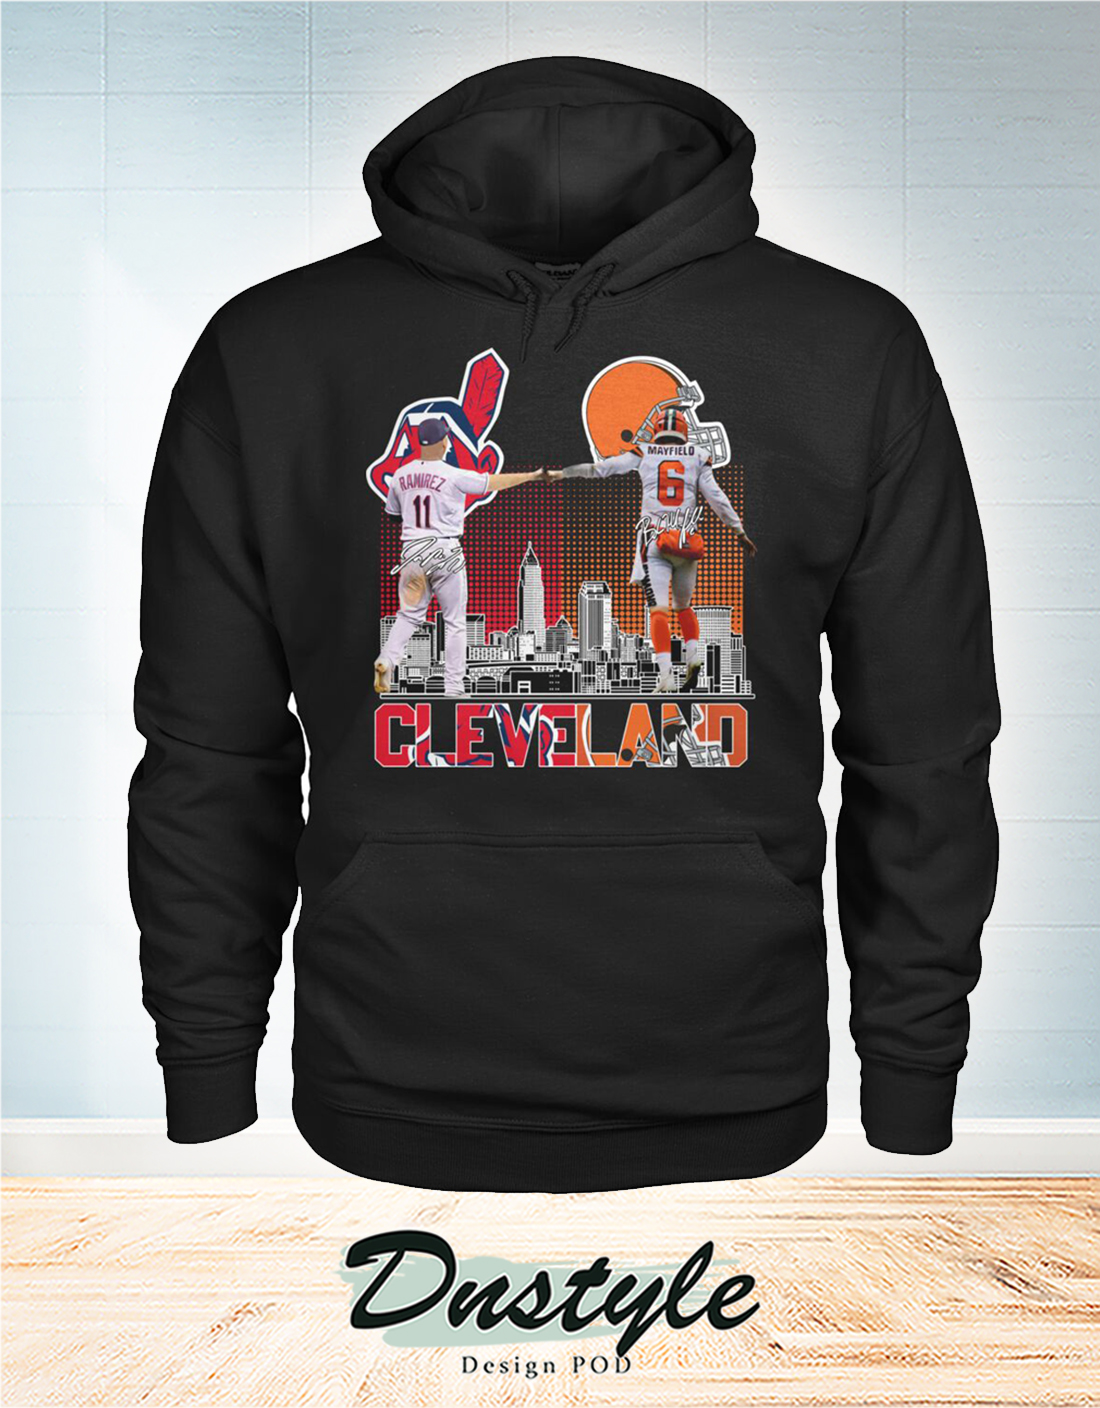 Cleveland Indians and Browns Ramirez and Mayfield hoodie